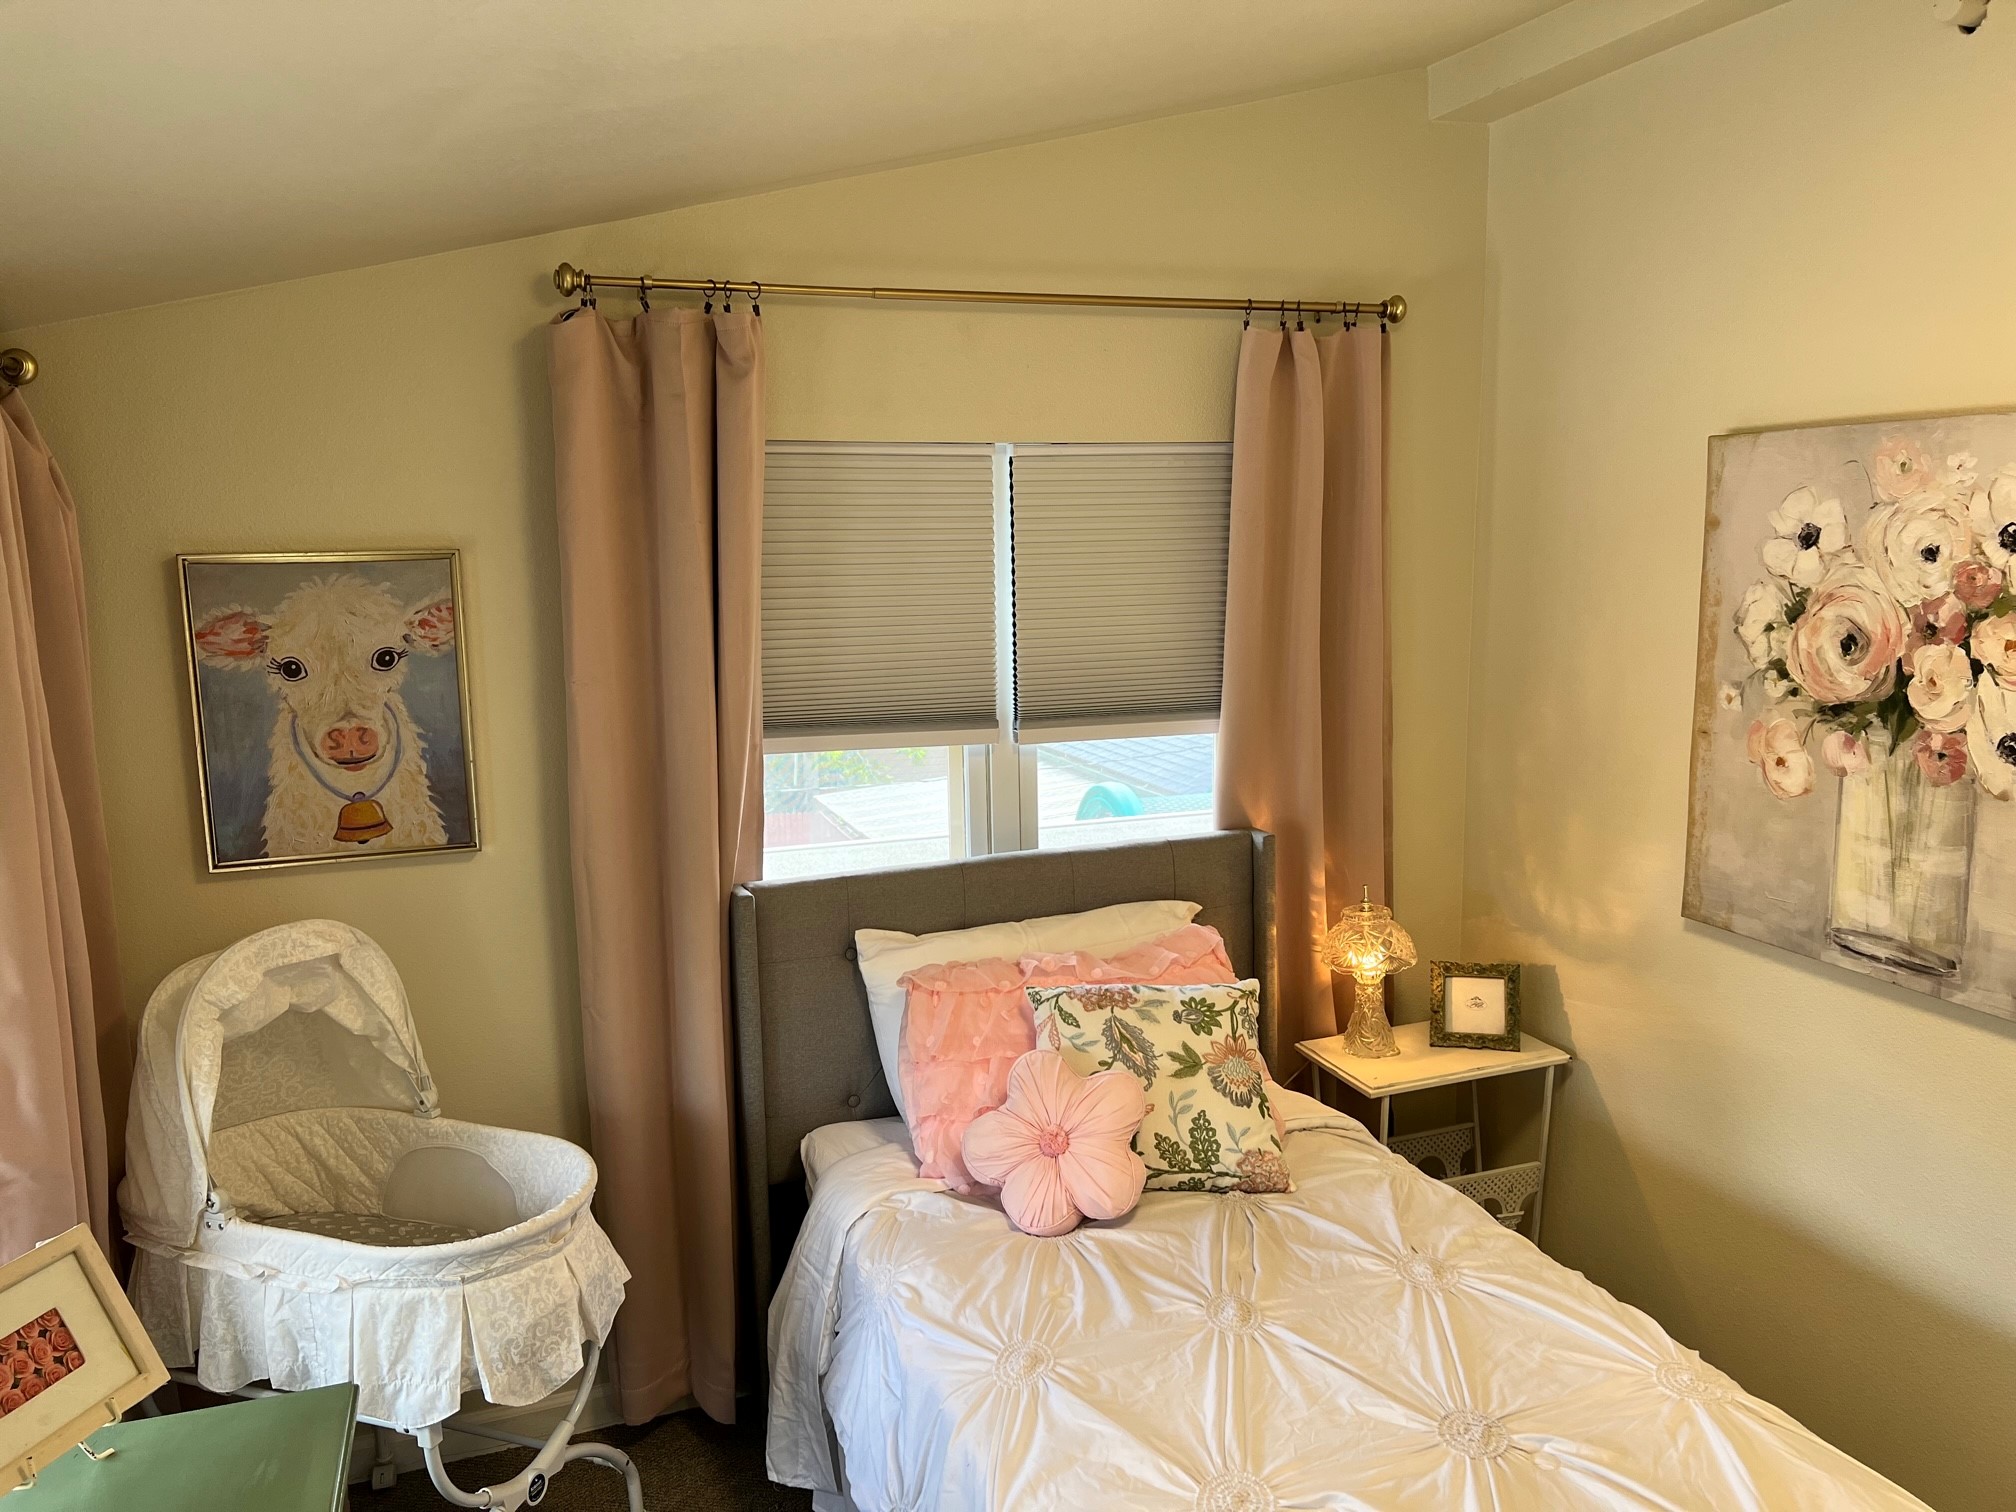 Bedroom with baby bassinet